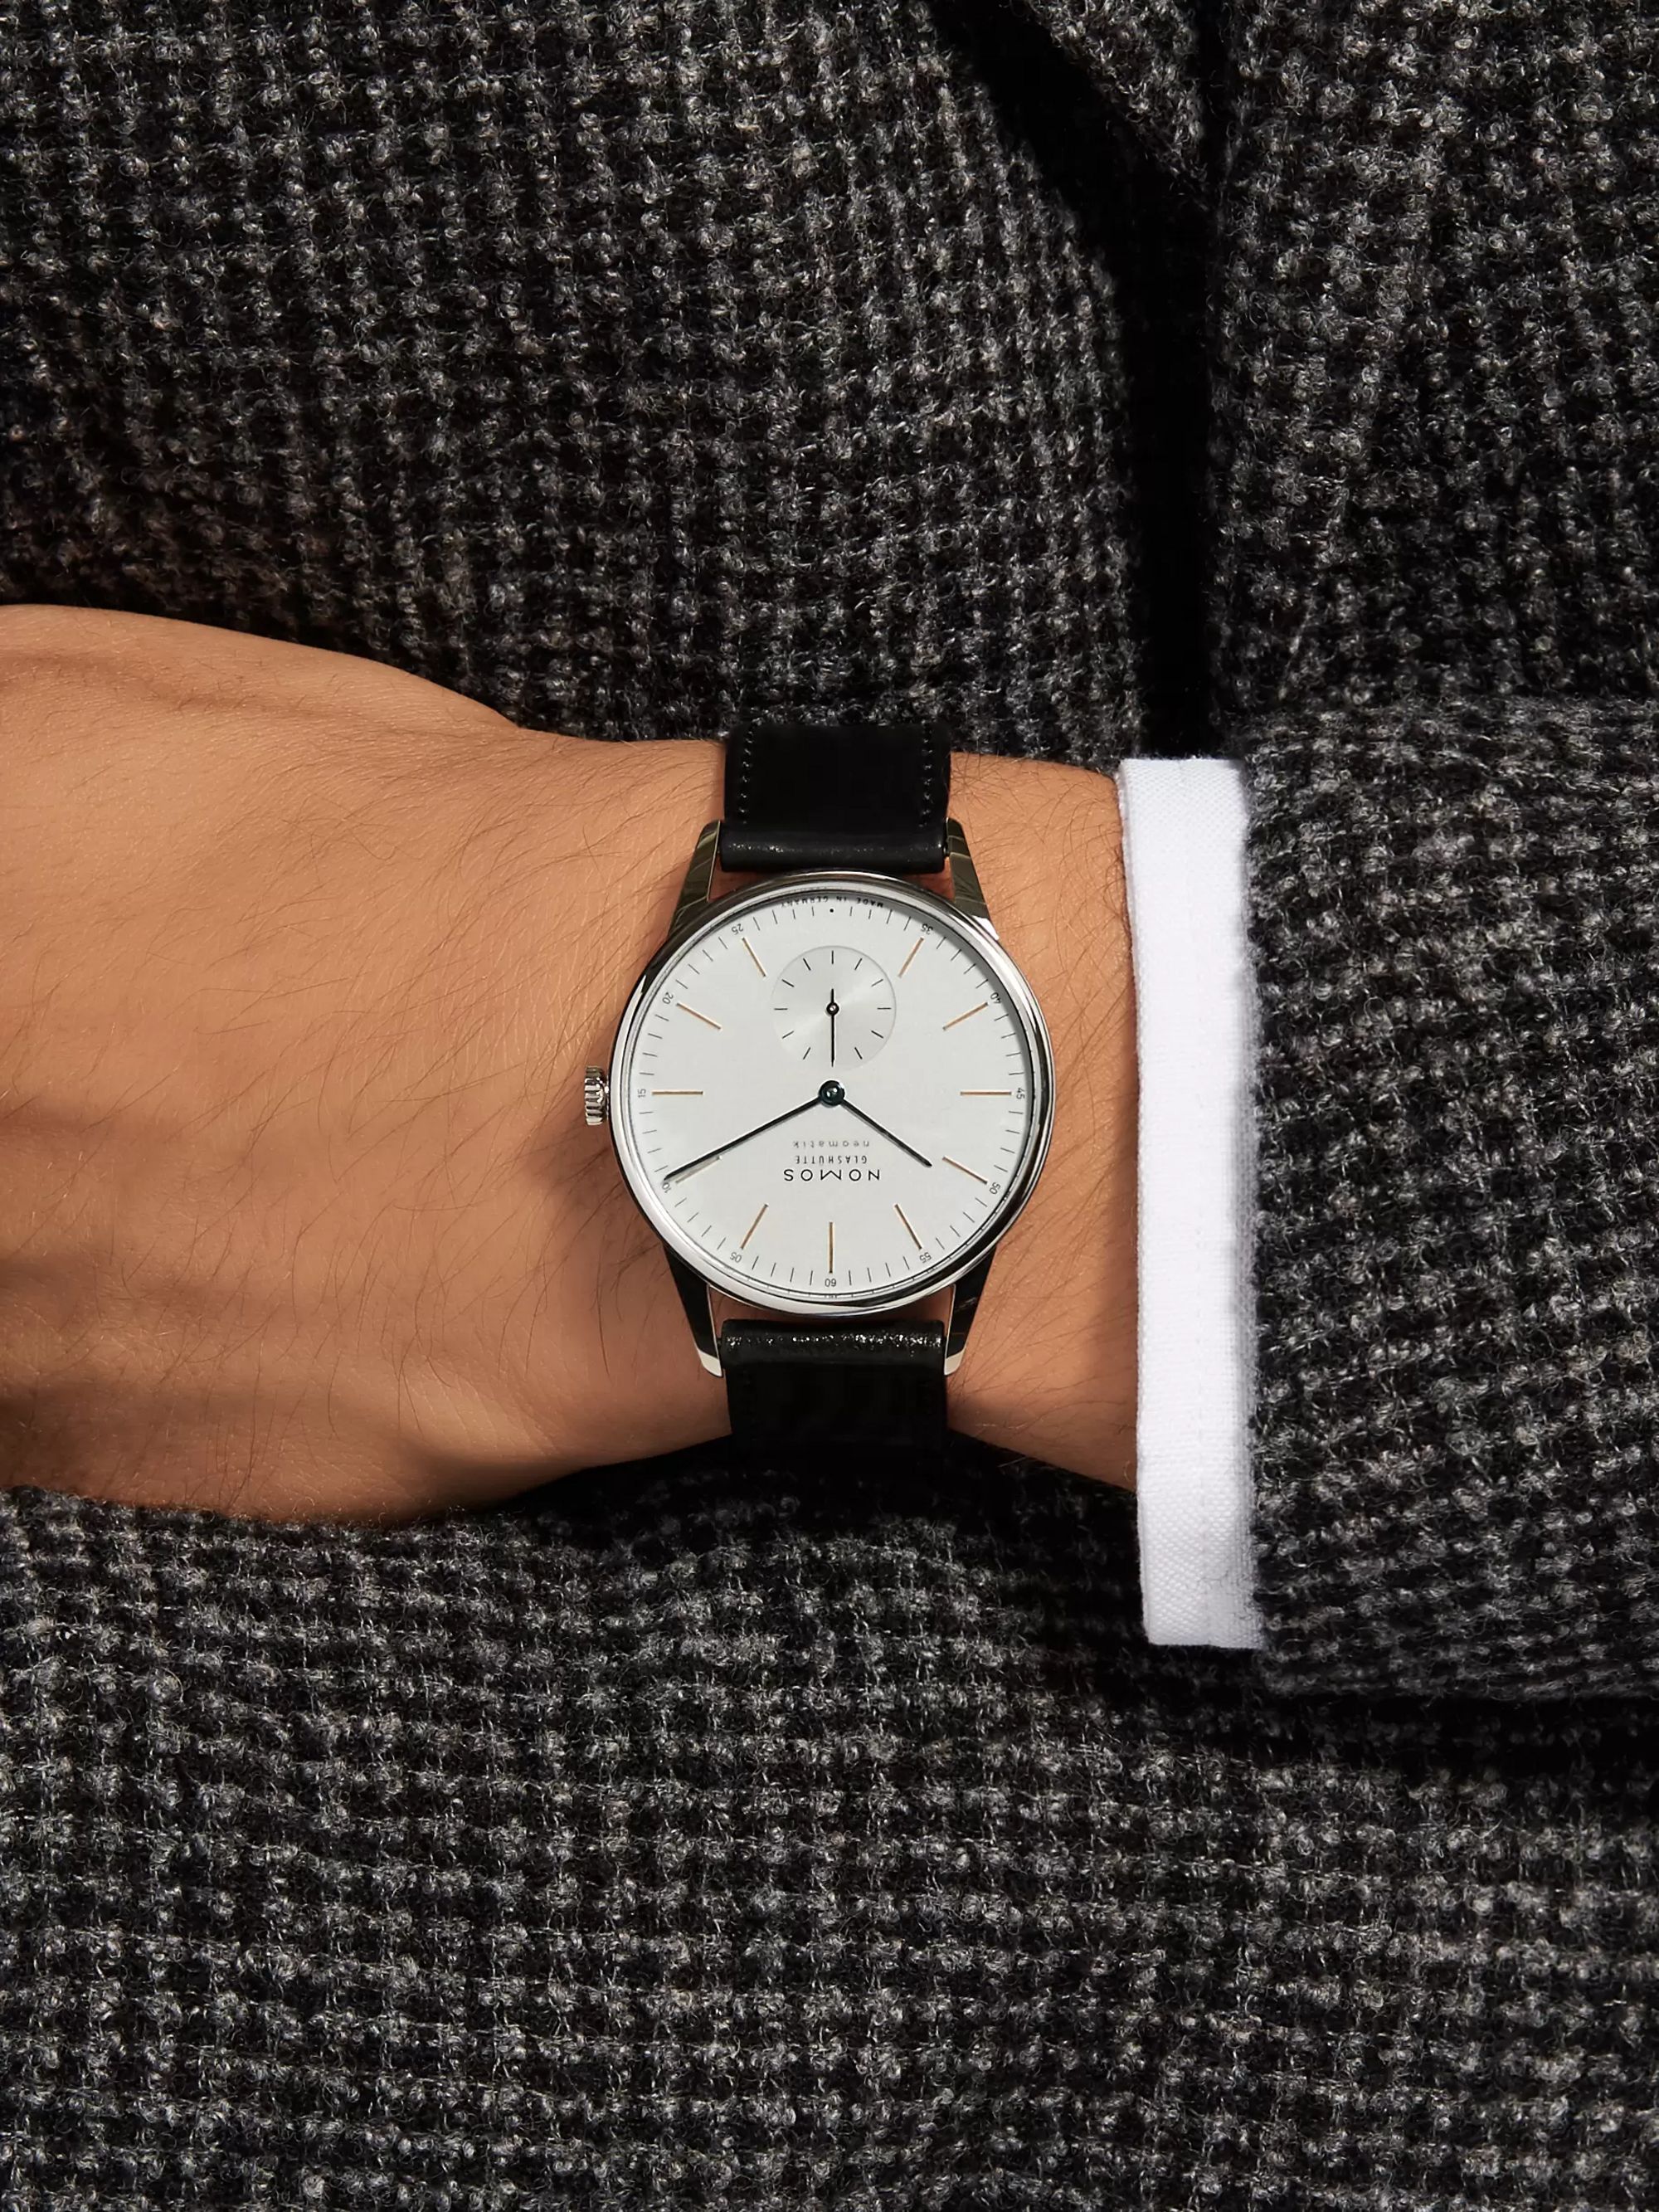 NOMOS GLASHÜTTE At Work Orion Neomatik Automatic 39mm Stainless Steel and Leather Watch, Ref. No. 340